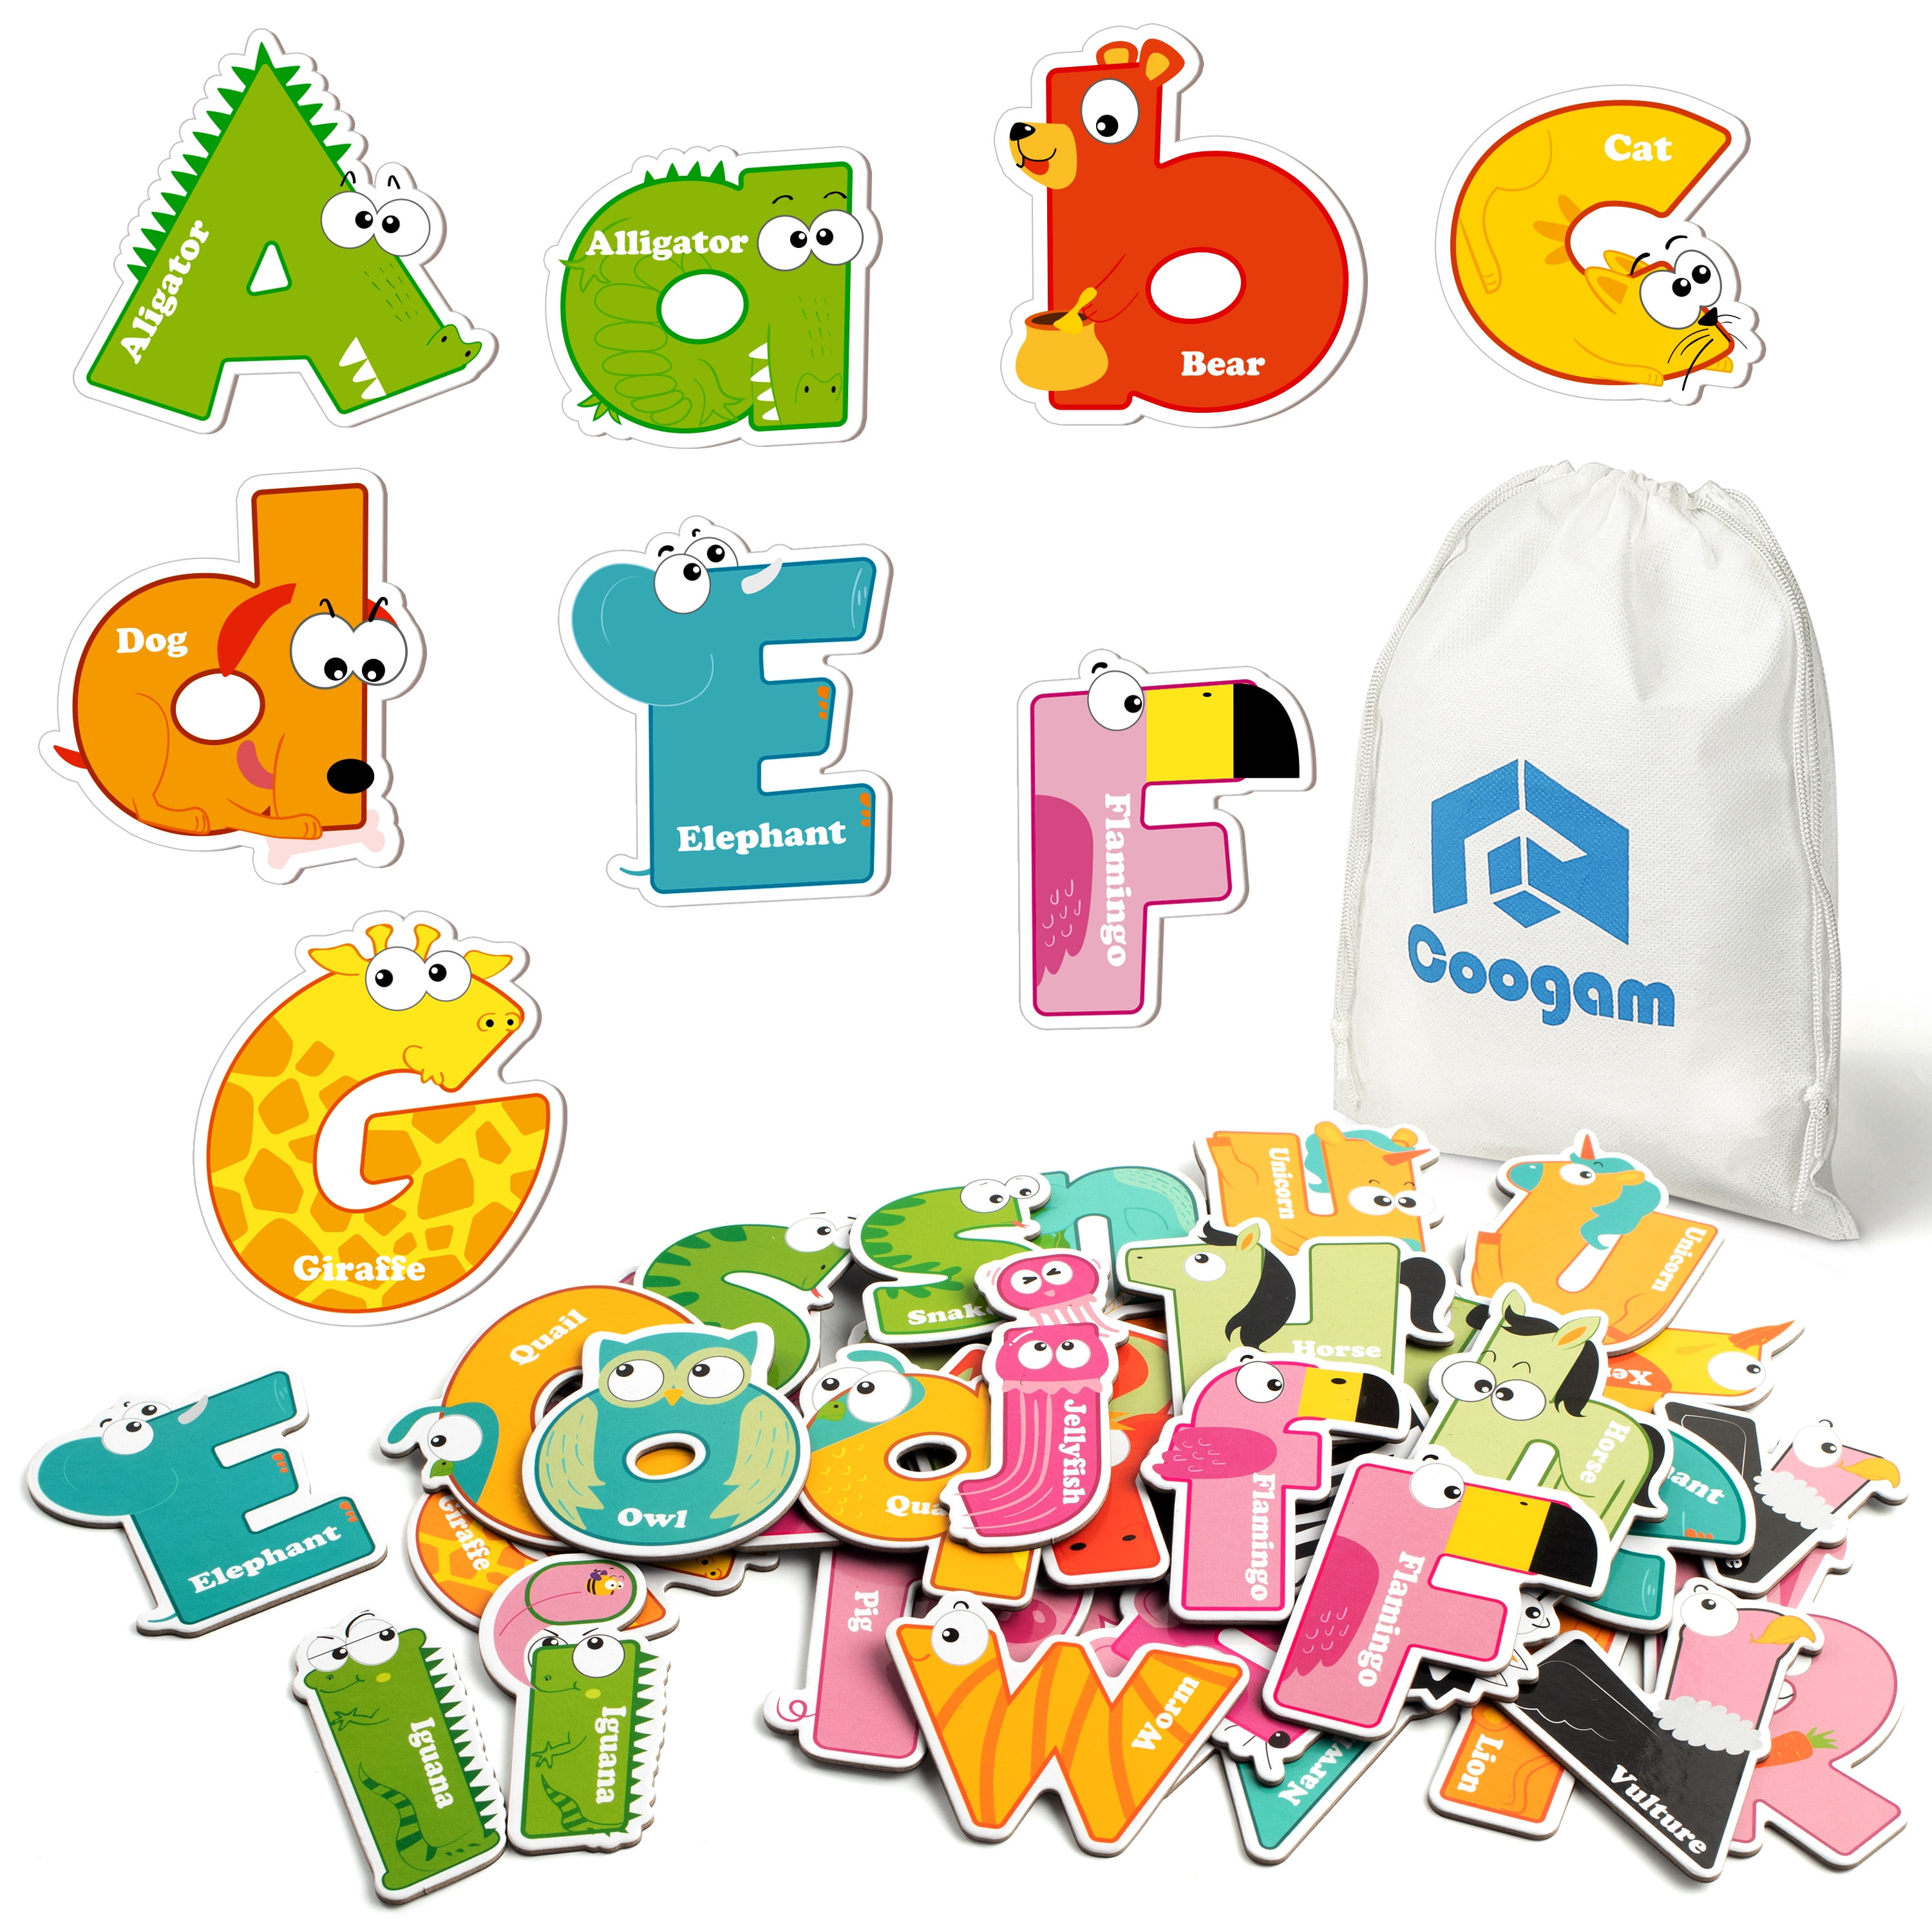 Craft Alphabet Wooden Letters School Educational Set NEW CHOOSE YOUR LETTERS 